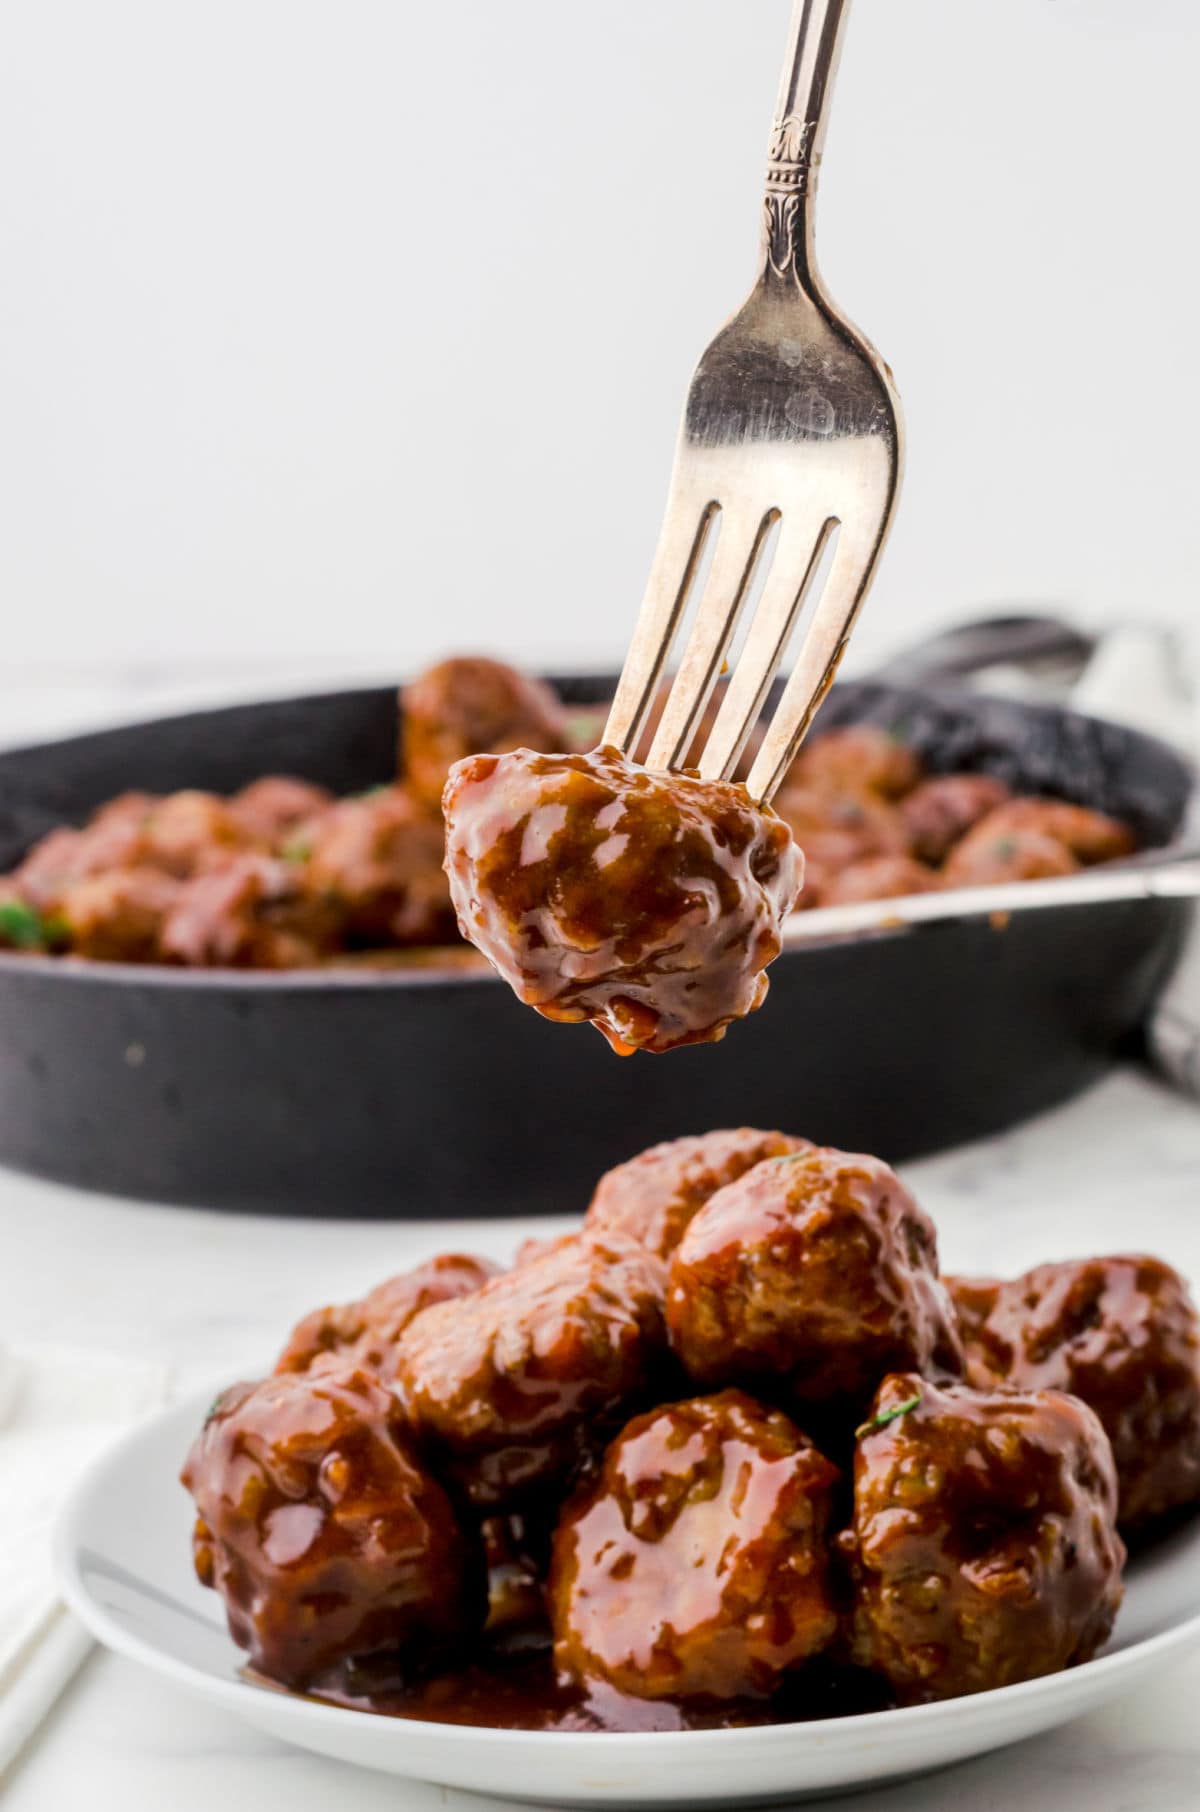 A meatball on a fork dripping with sauce.